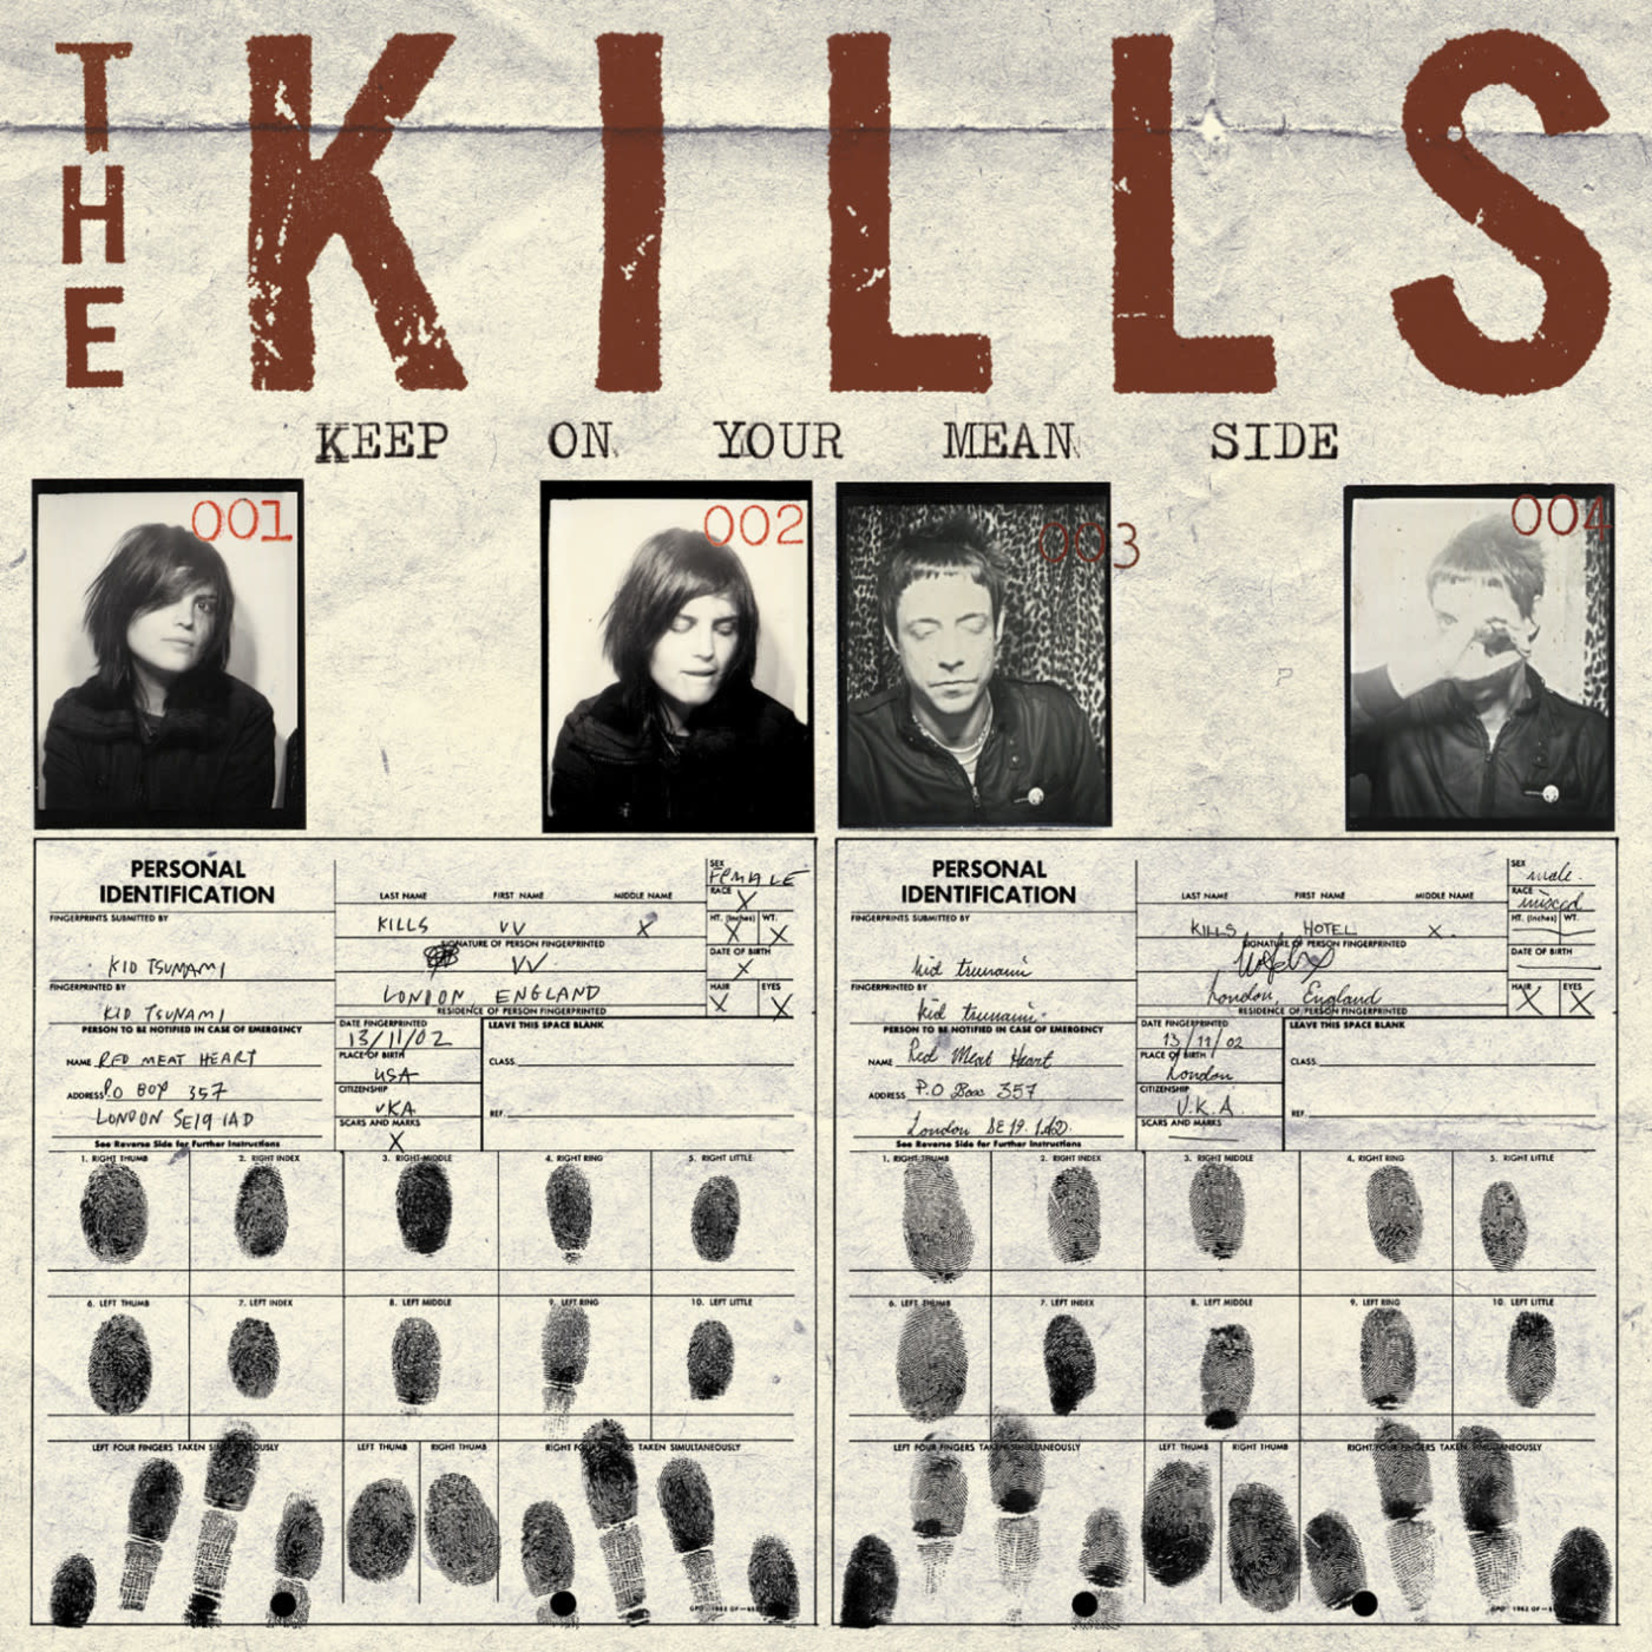 [New] The Kills - Keep On Your Mean Side